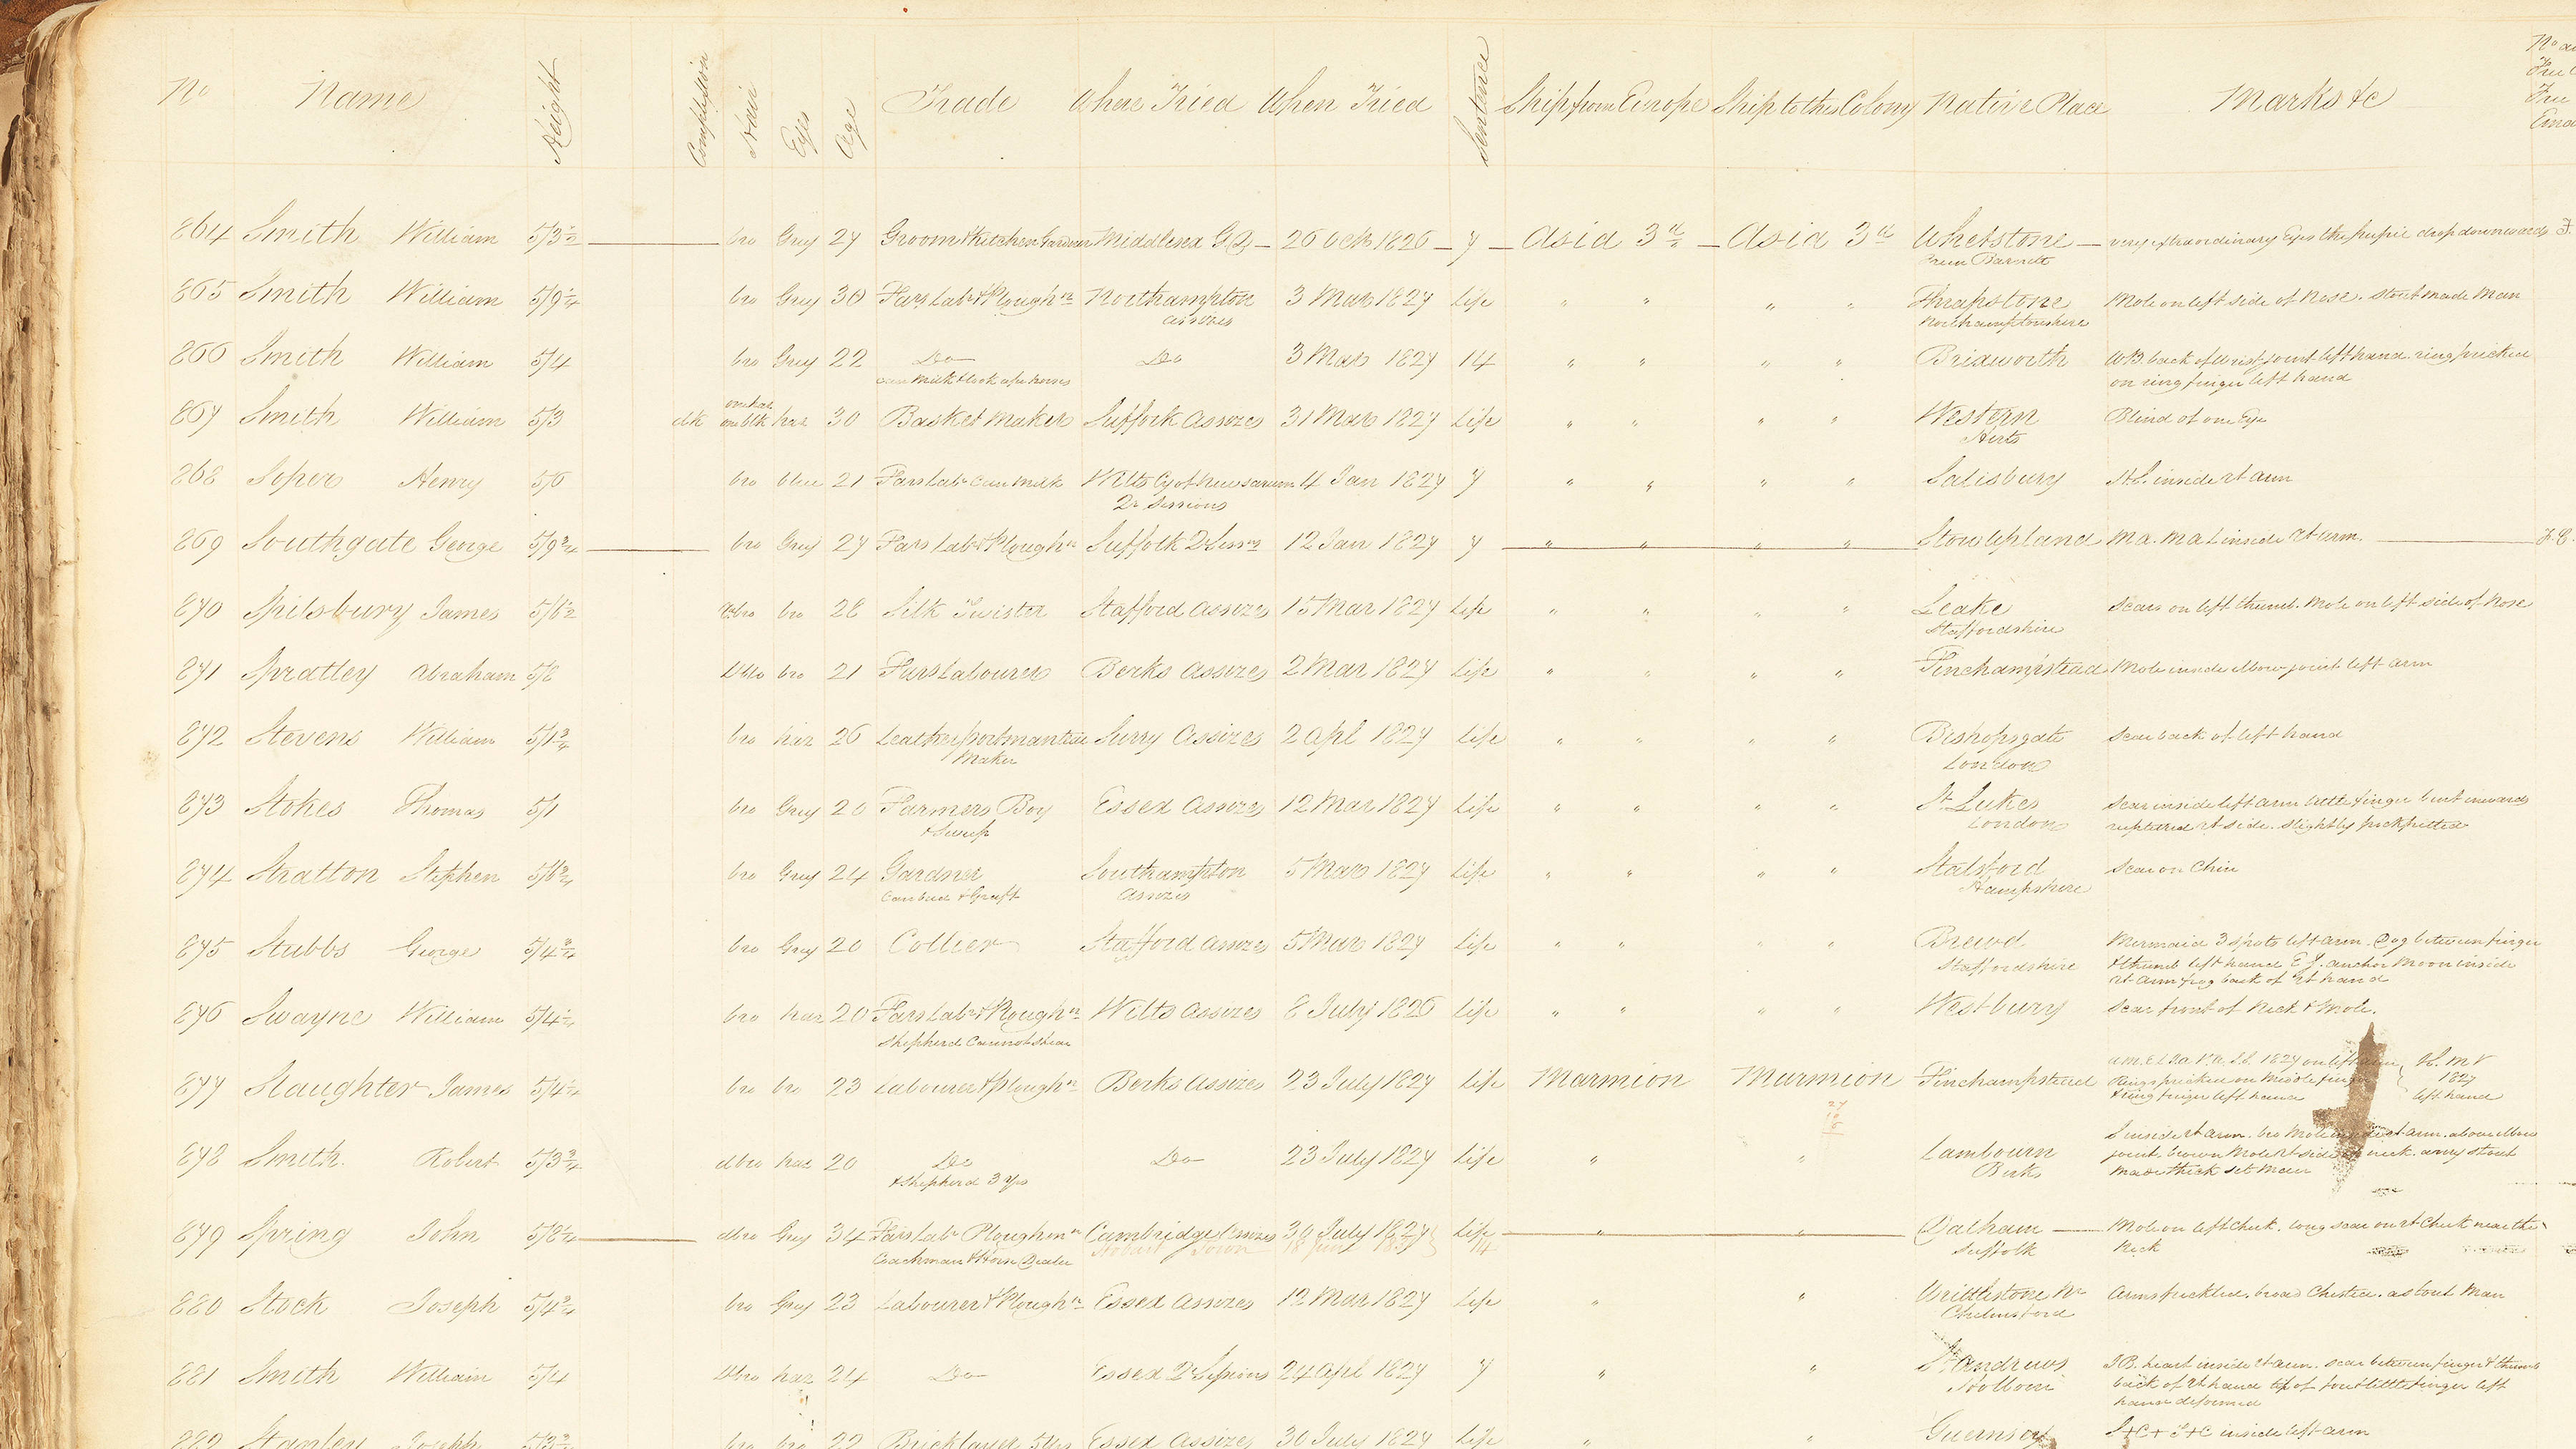 Excerpt from ledgers held as part of Brickendon Estate’s archives mentioning Abraham Spratley.